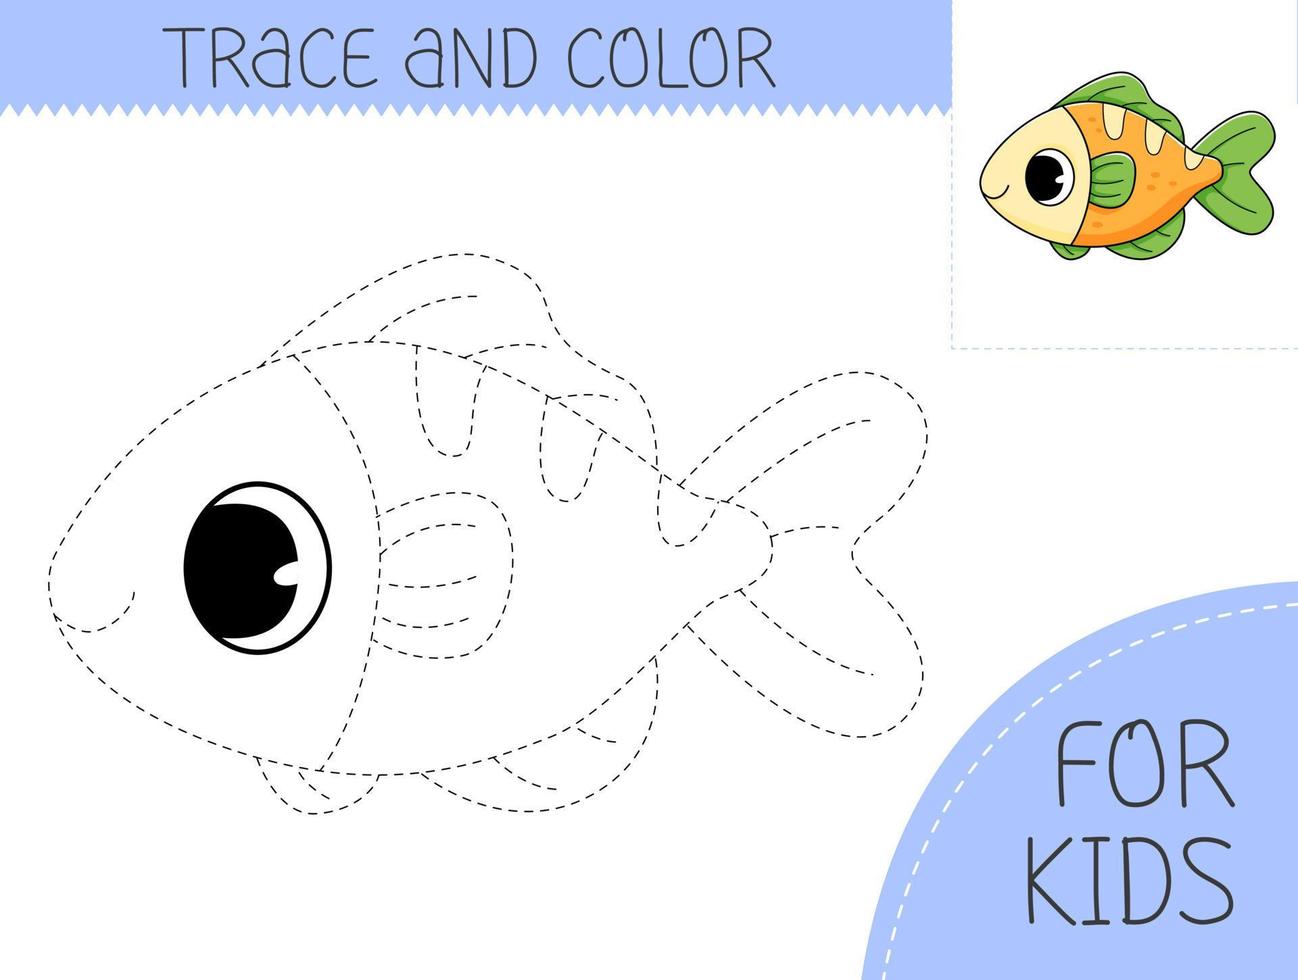 Trace and color coloring book with fish for kids. Coloring page with cartoon fish. illustration for kids. vector